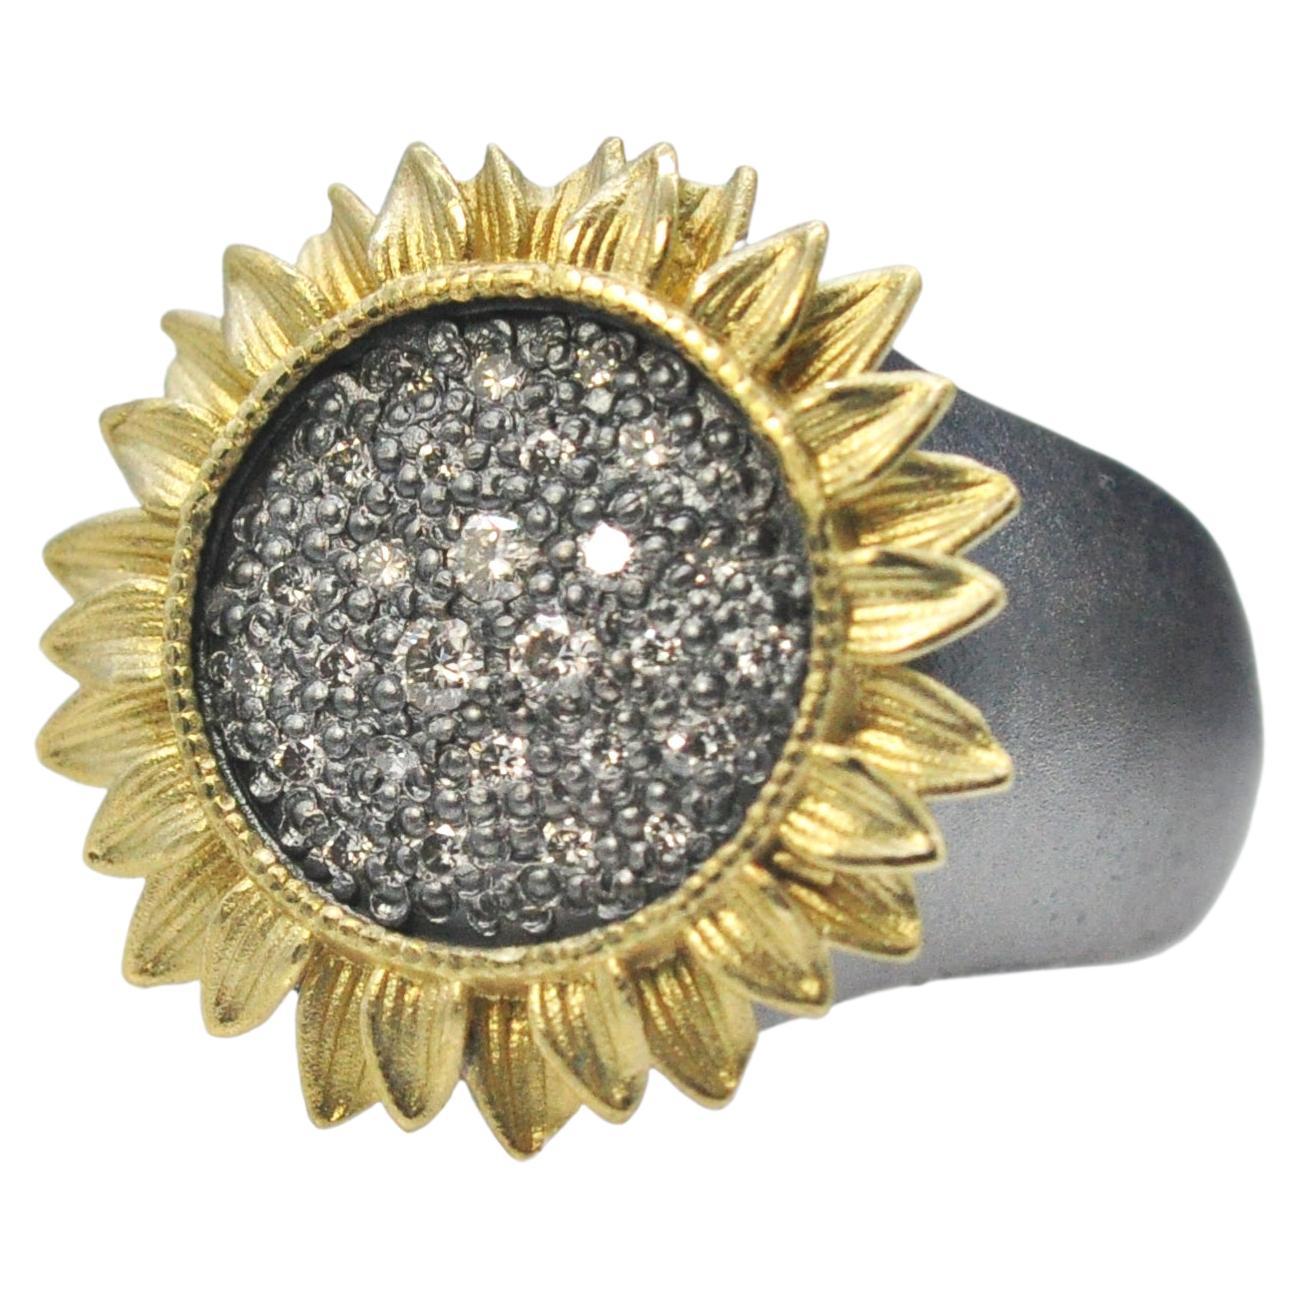 For Sale:  Sunflower Ring with Pave Set Diamonds in Oxidized Silver, Large